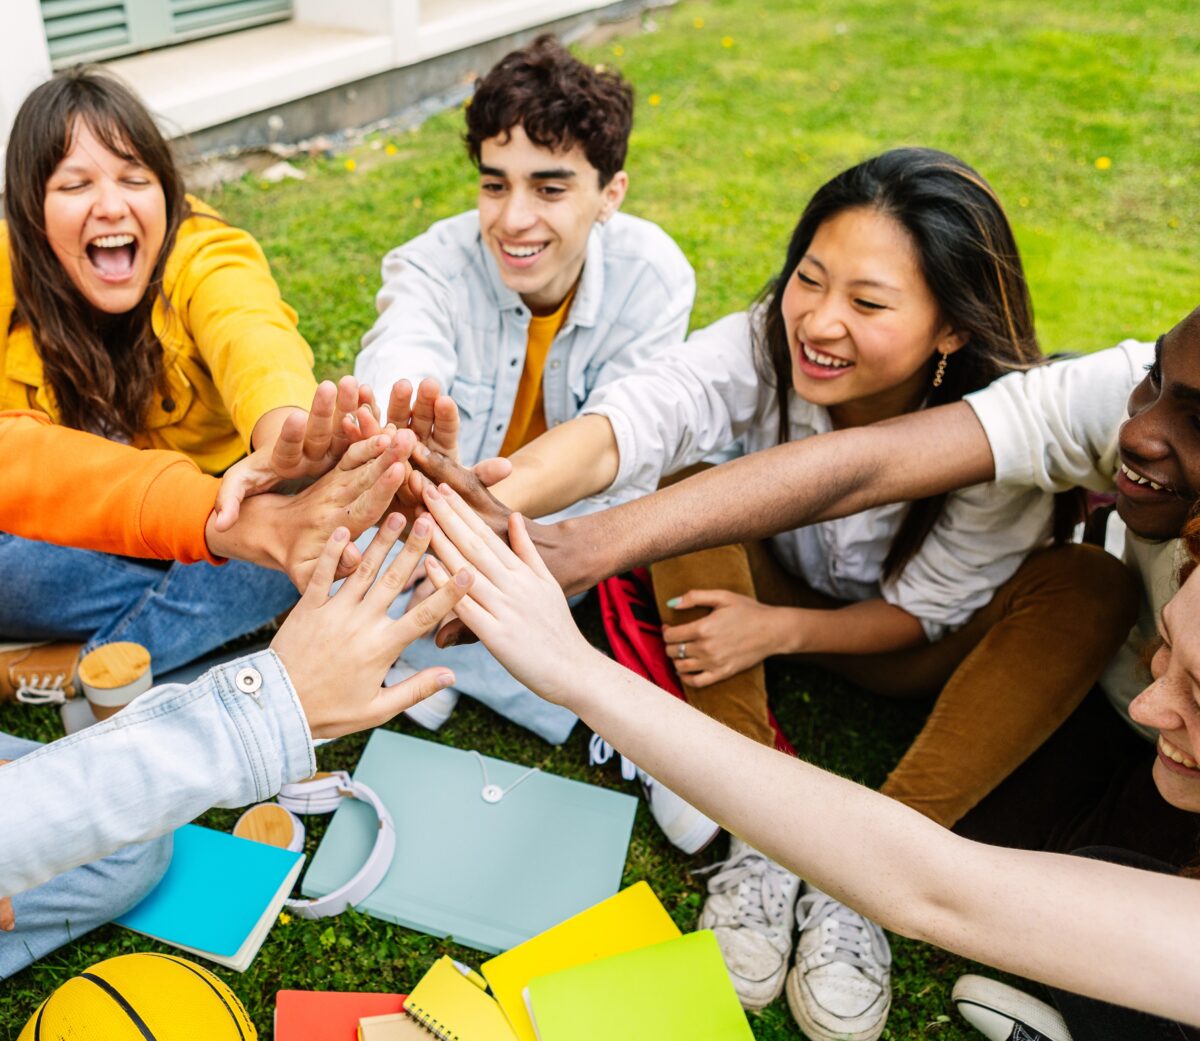 Joyful group of diverse young adults giving high five together outdoors